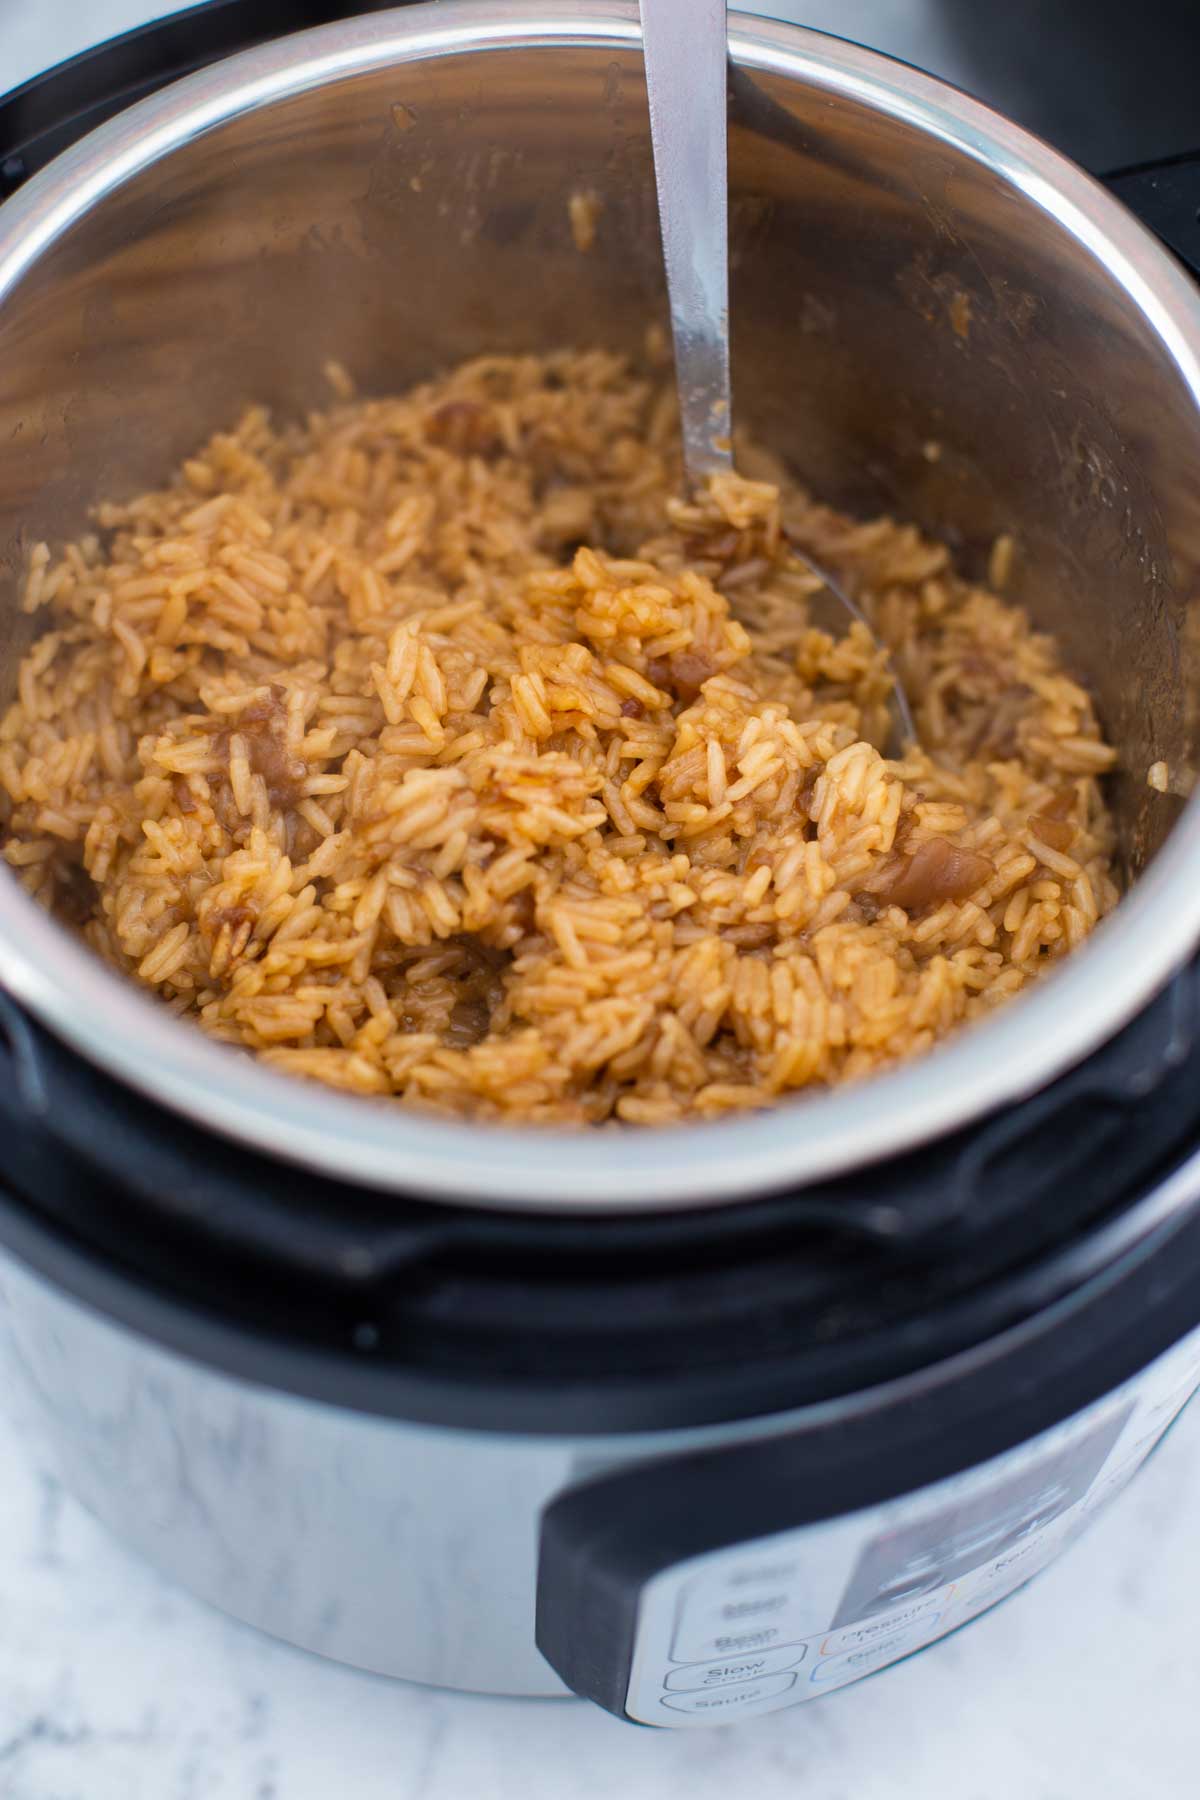 The finished sticky butter rice is shown being fluffed with a spoon inside the Instant Pot.